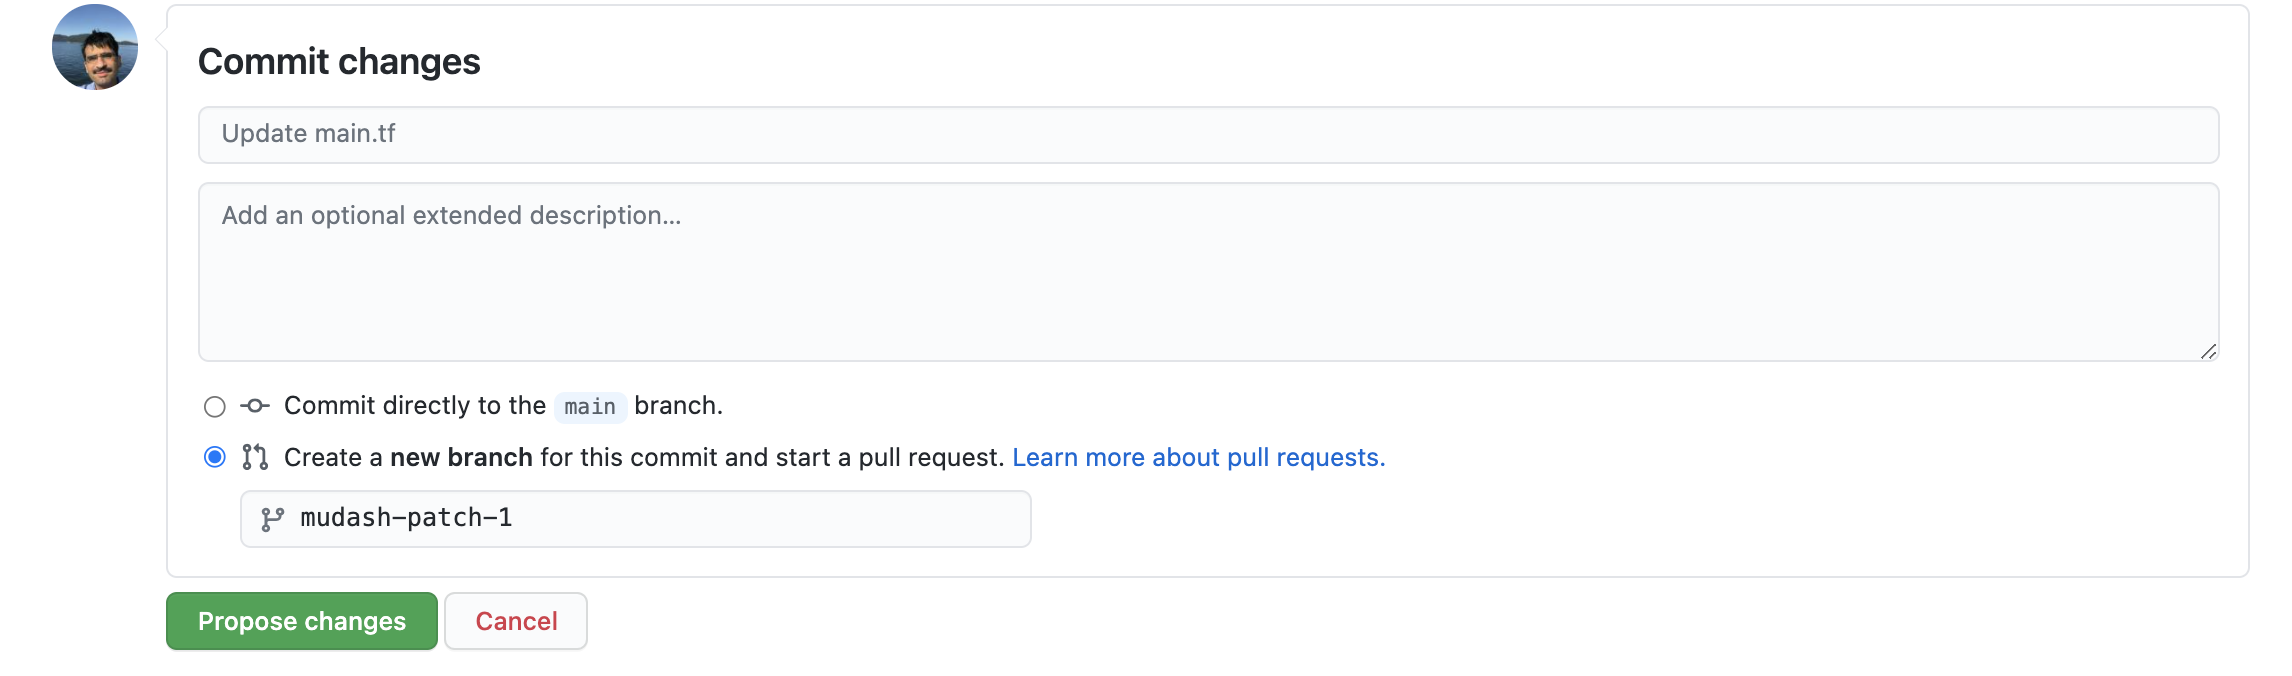 Open Pull Request